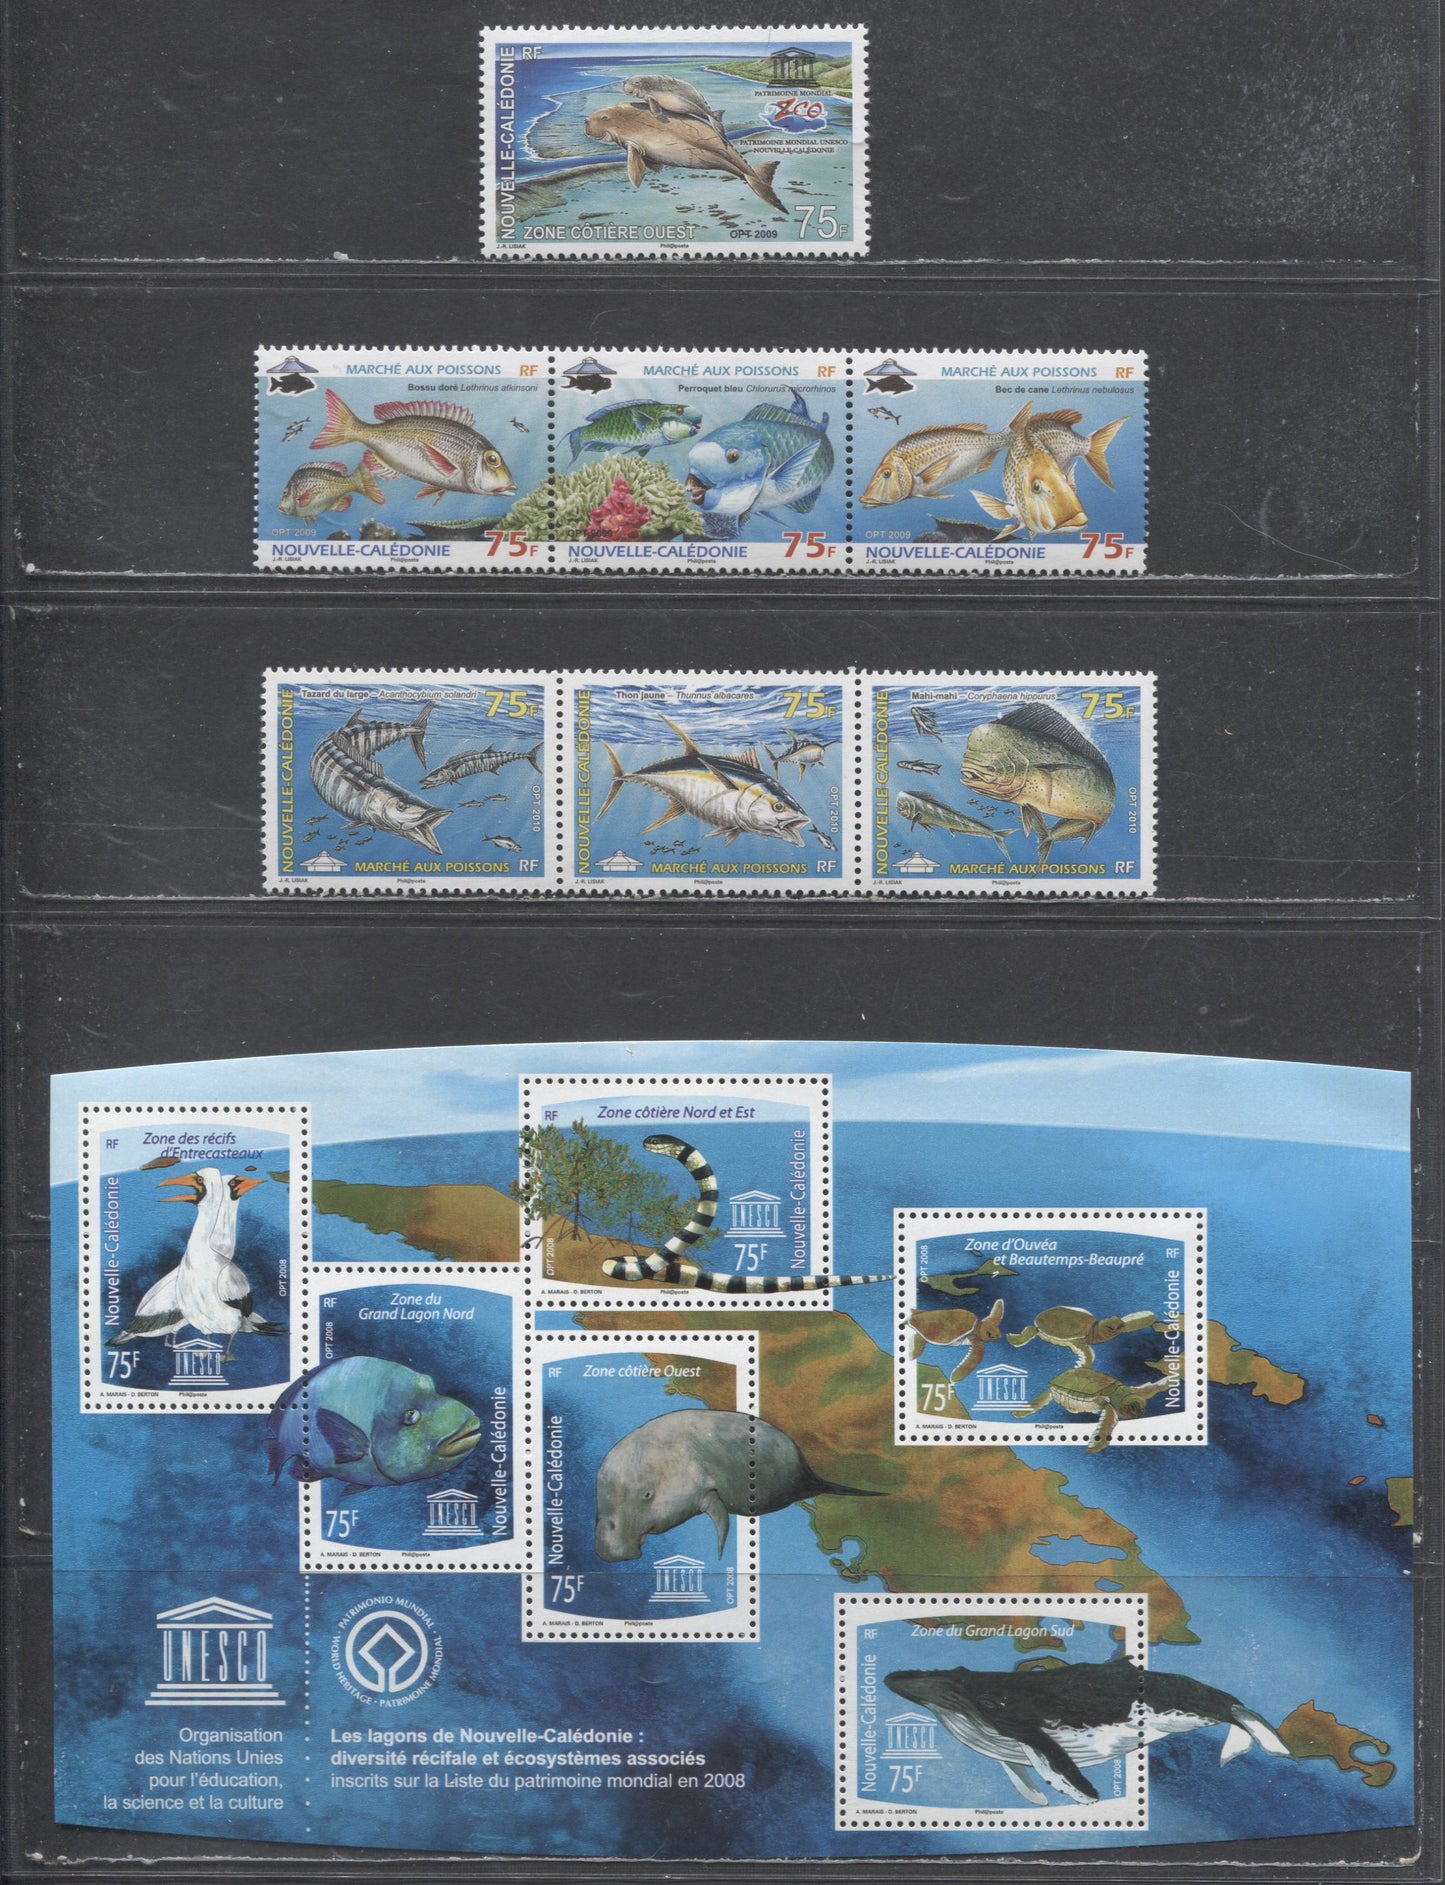 Lot 131 New Caledonia SC#1062/1088 2008-2010 UNESCO & Fish Issues, 4 VFNH Single, Strips Of 3 & Souvenir Sheet, Click on Listing to See ALL Pictures, 2017 Scott Cat. $22.65